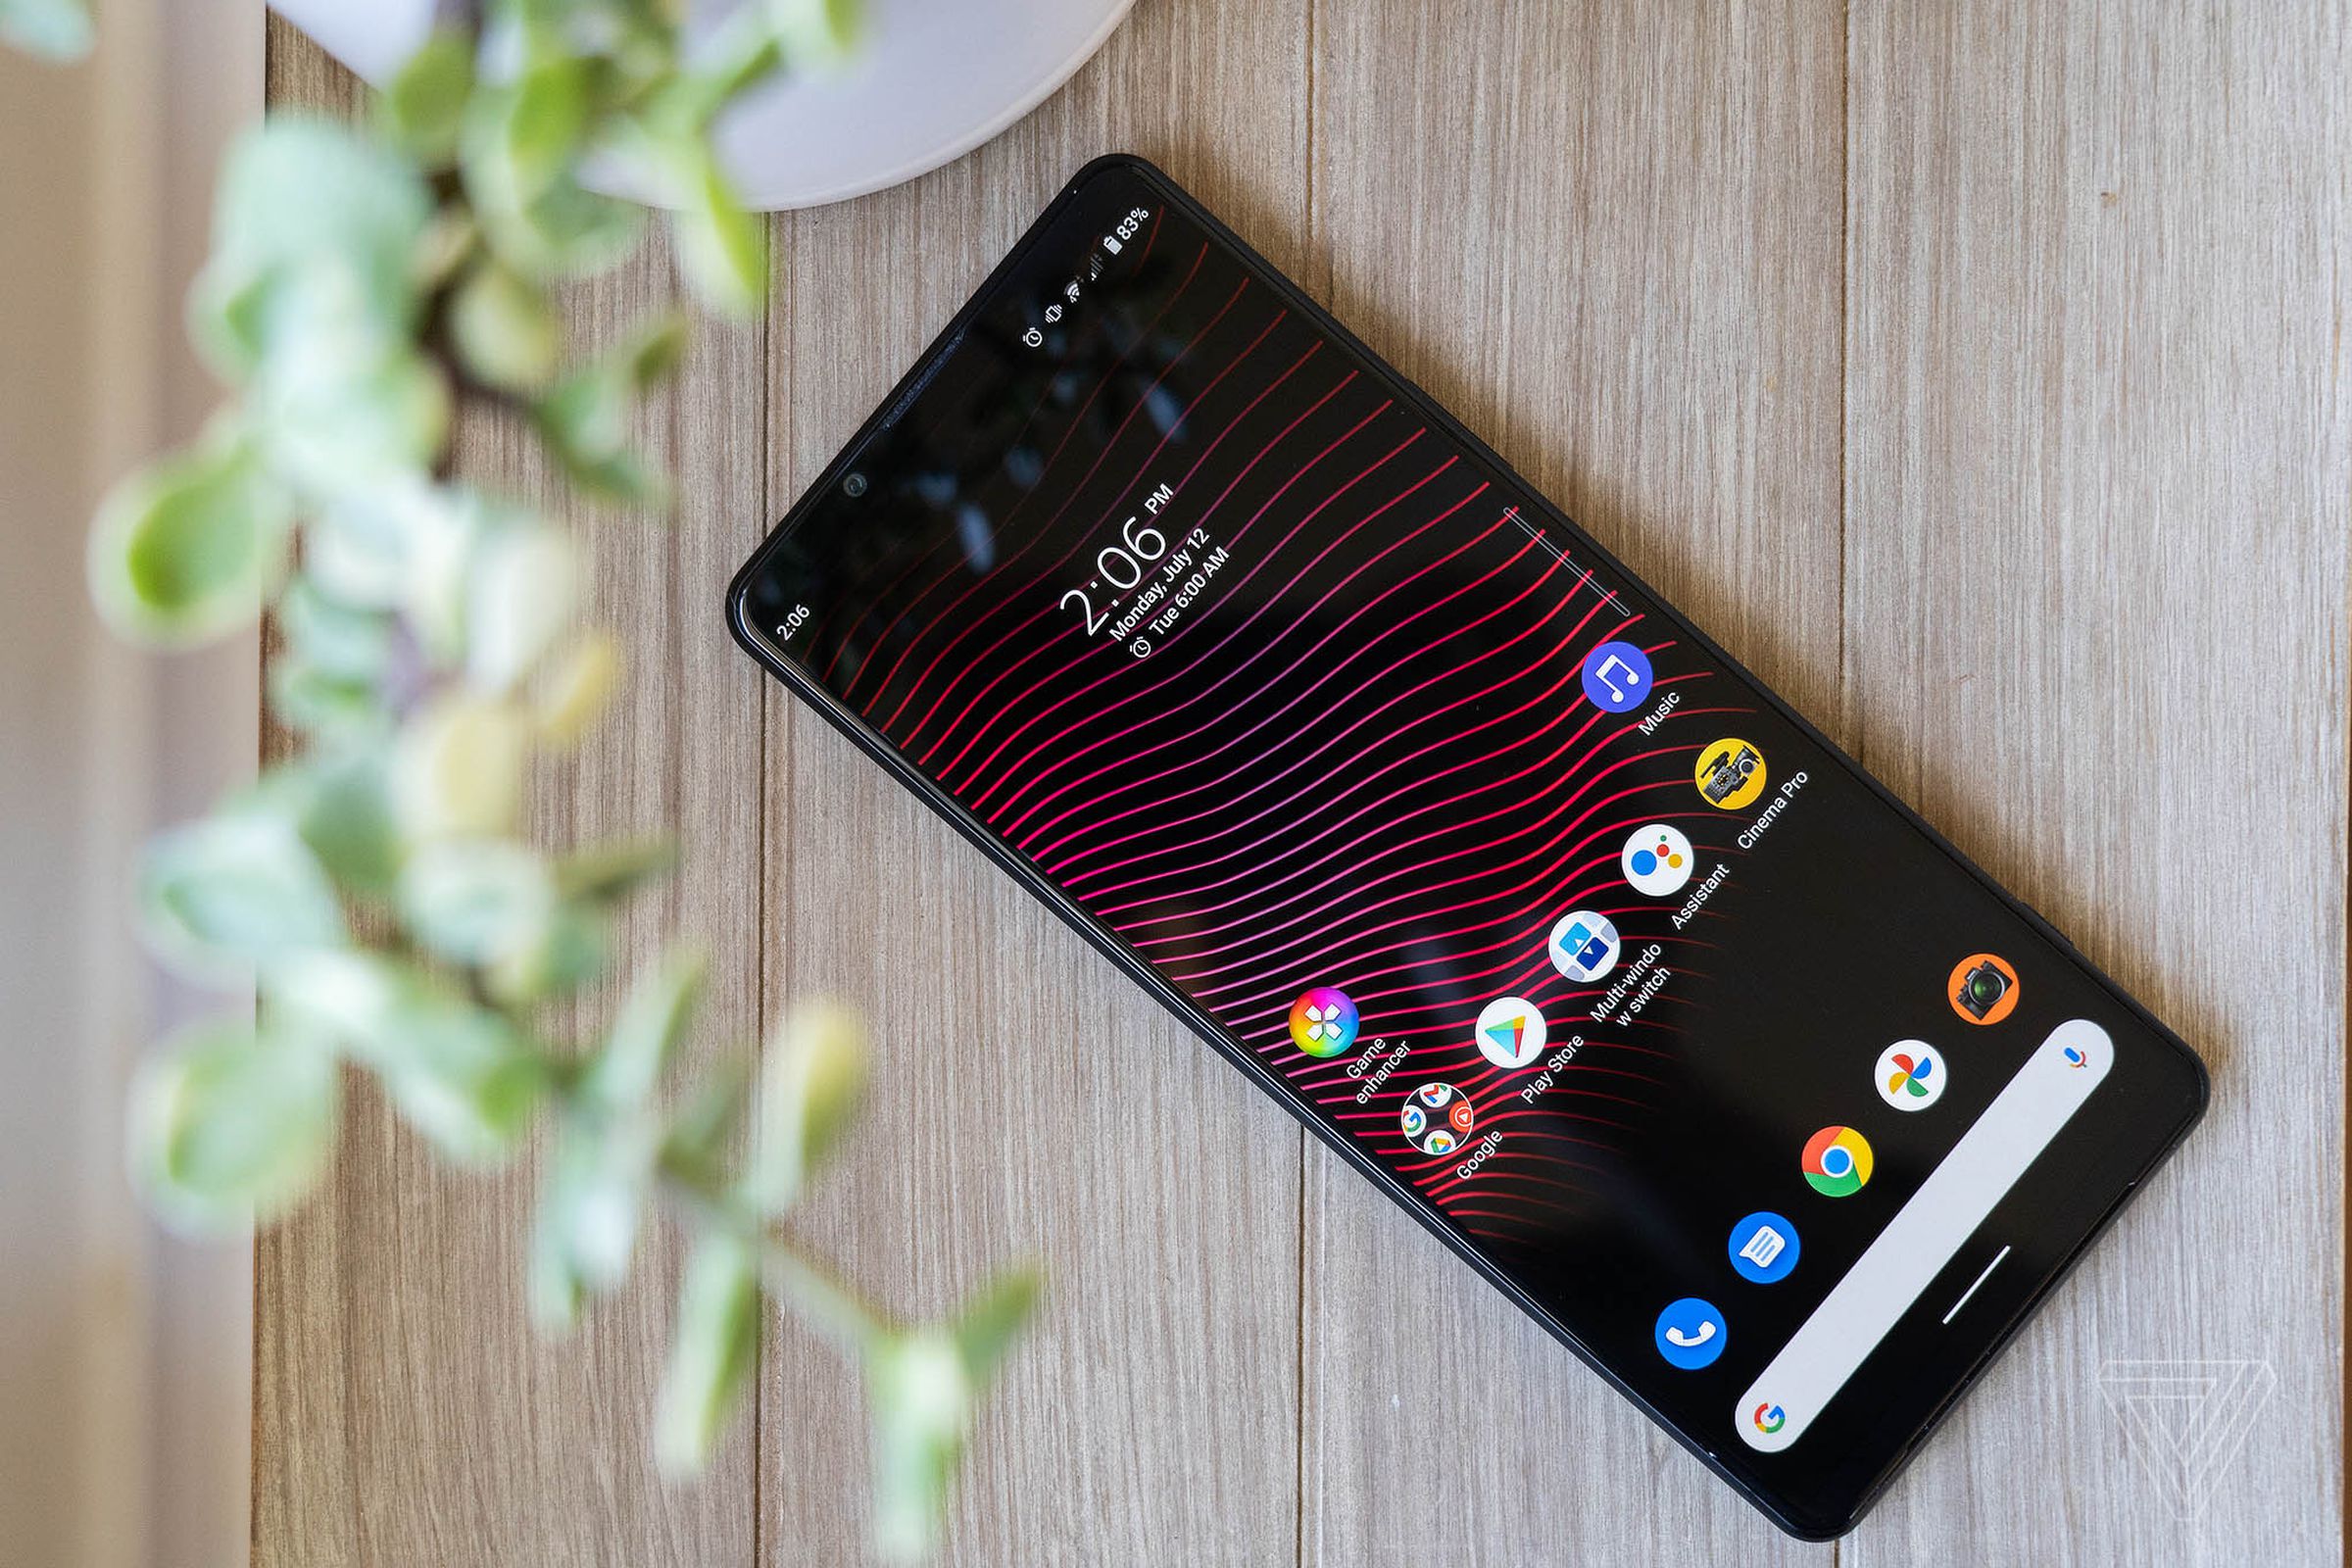 The Xperia 1 III doesn’t offer enough above and beyond the established flagships to justify its high cost.